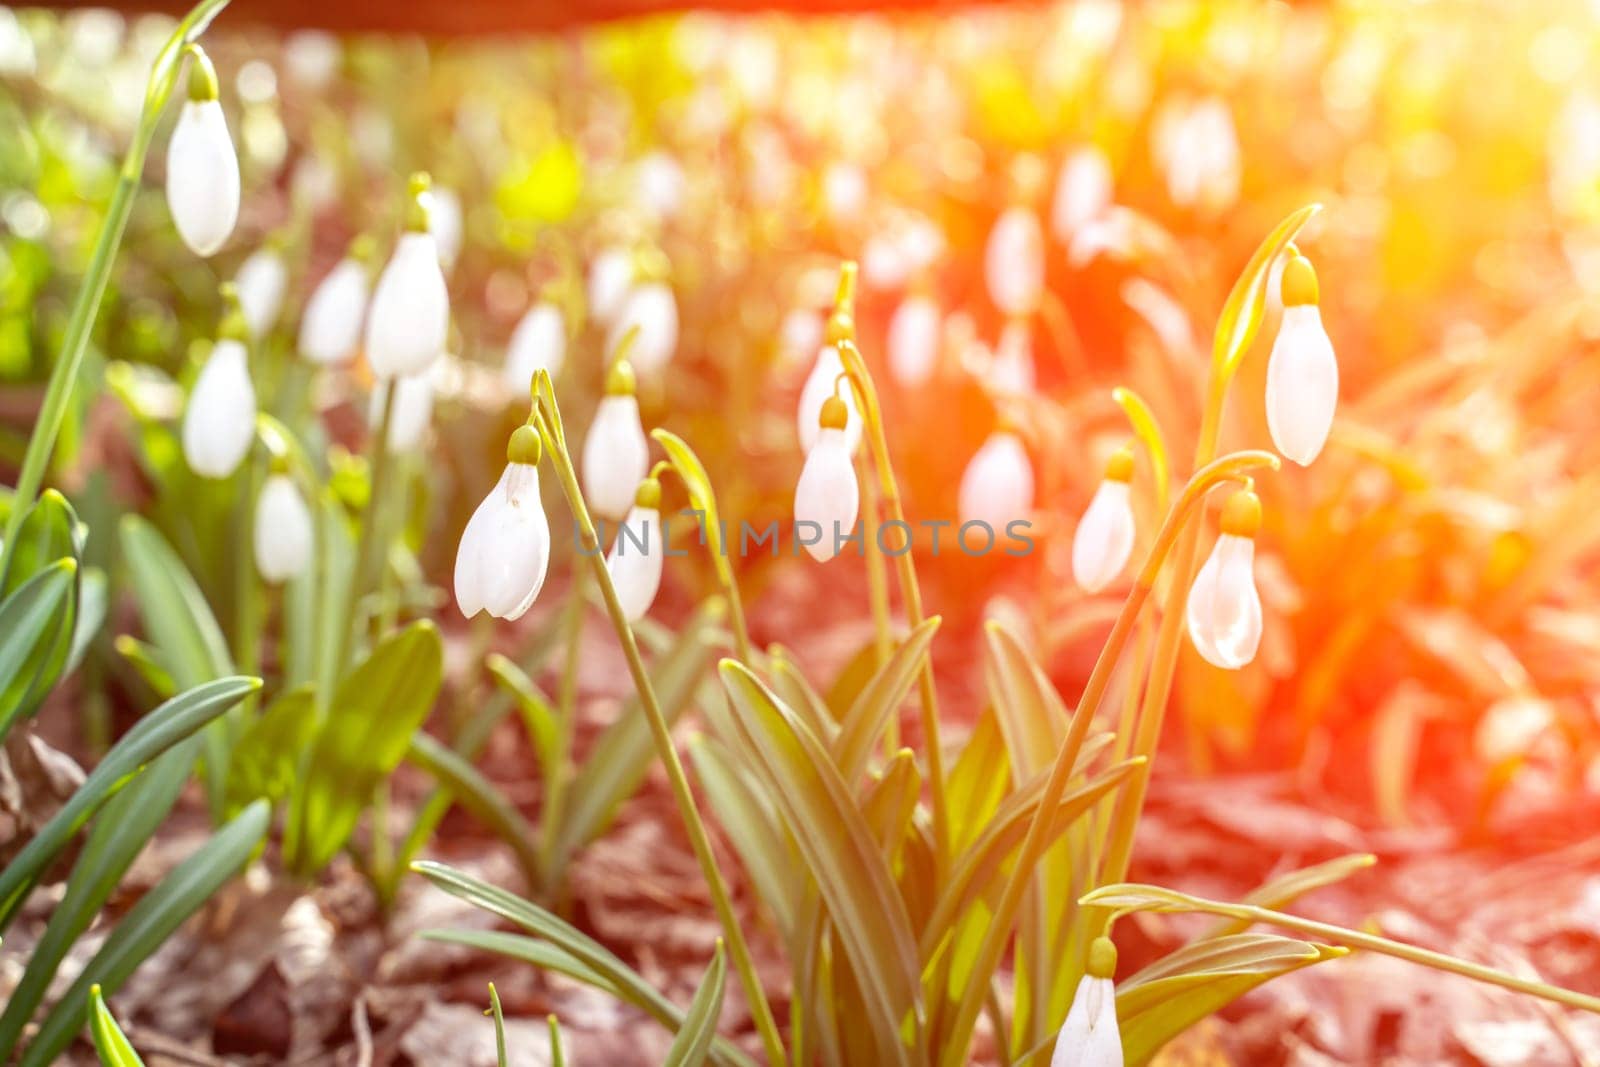 Snowdrops or Galanthus nivalis in the sunlight. A large field of by Matiunina